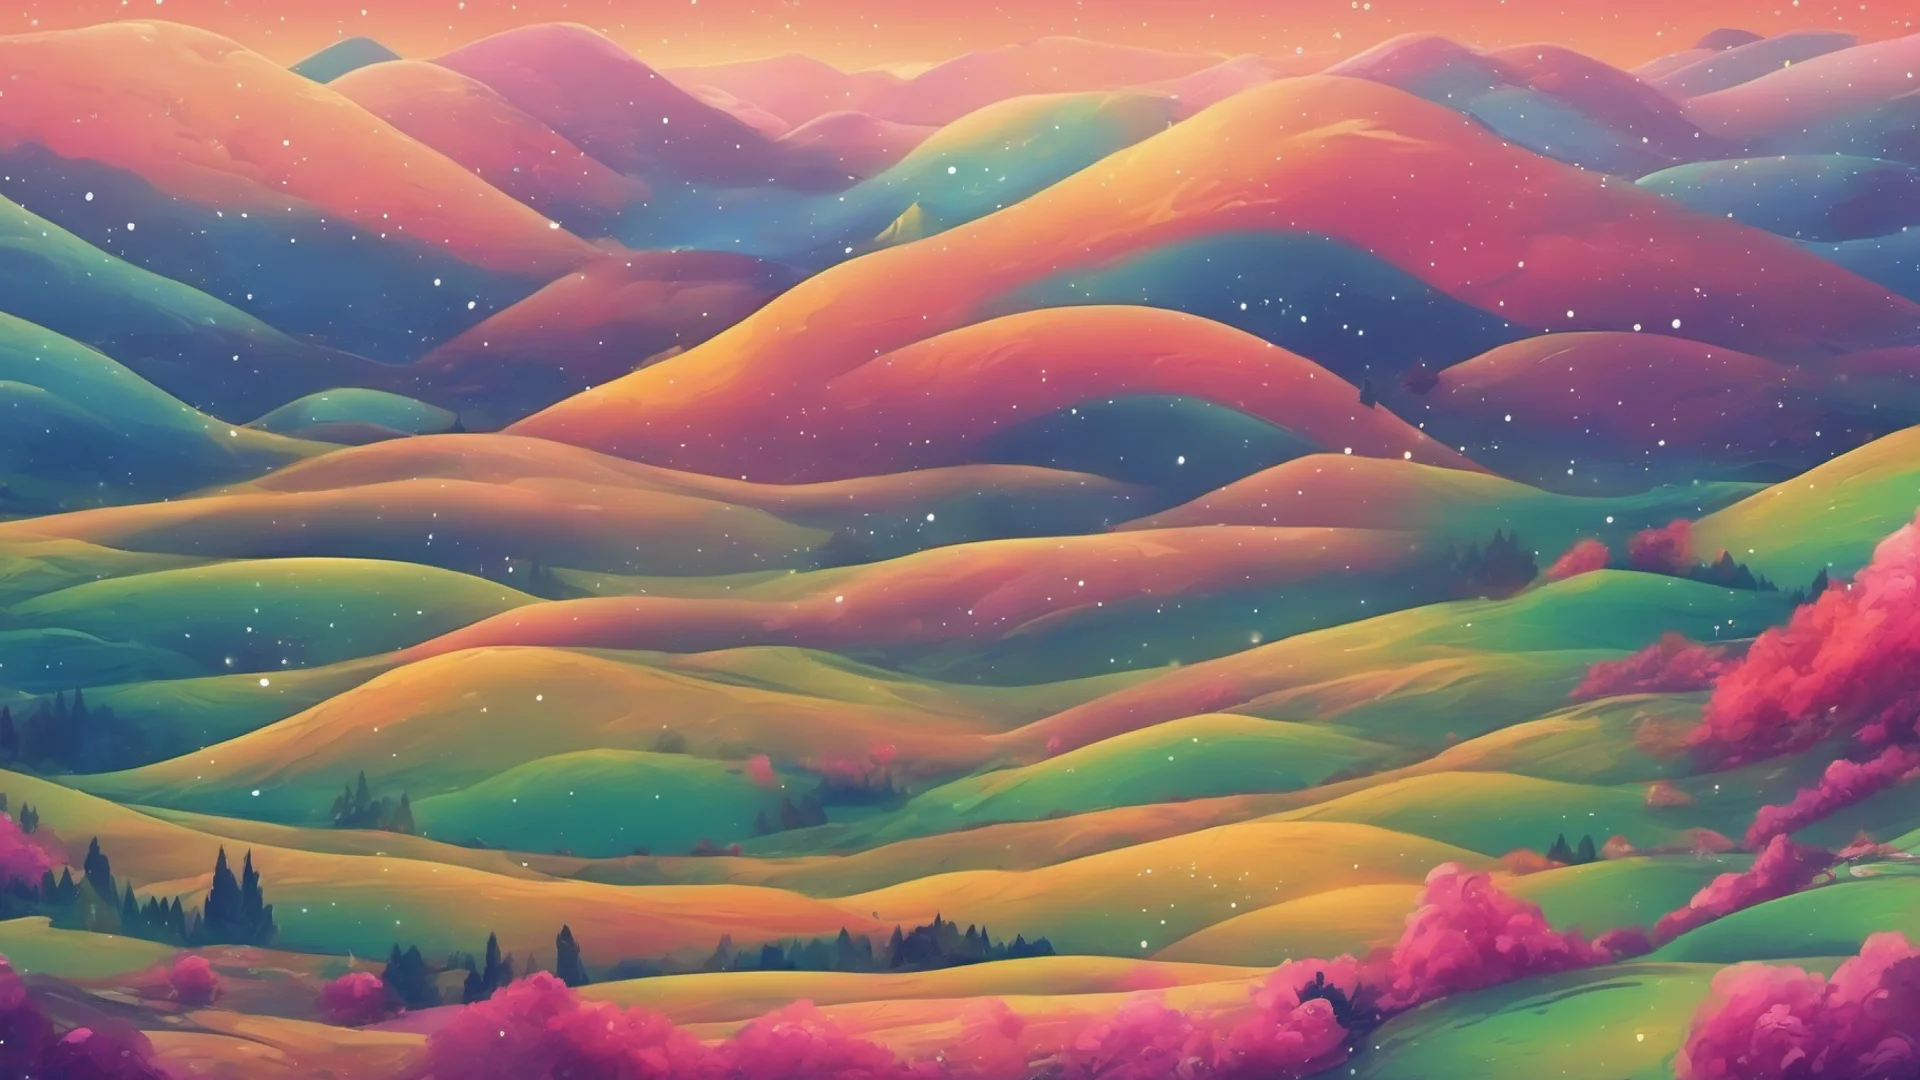 amazing background gentle rolling hills valleys colorful fantasy universe stars amazing awesome portrait 2 wide